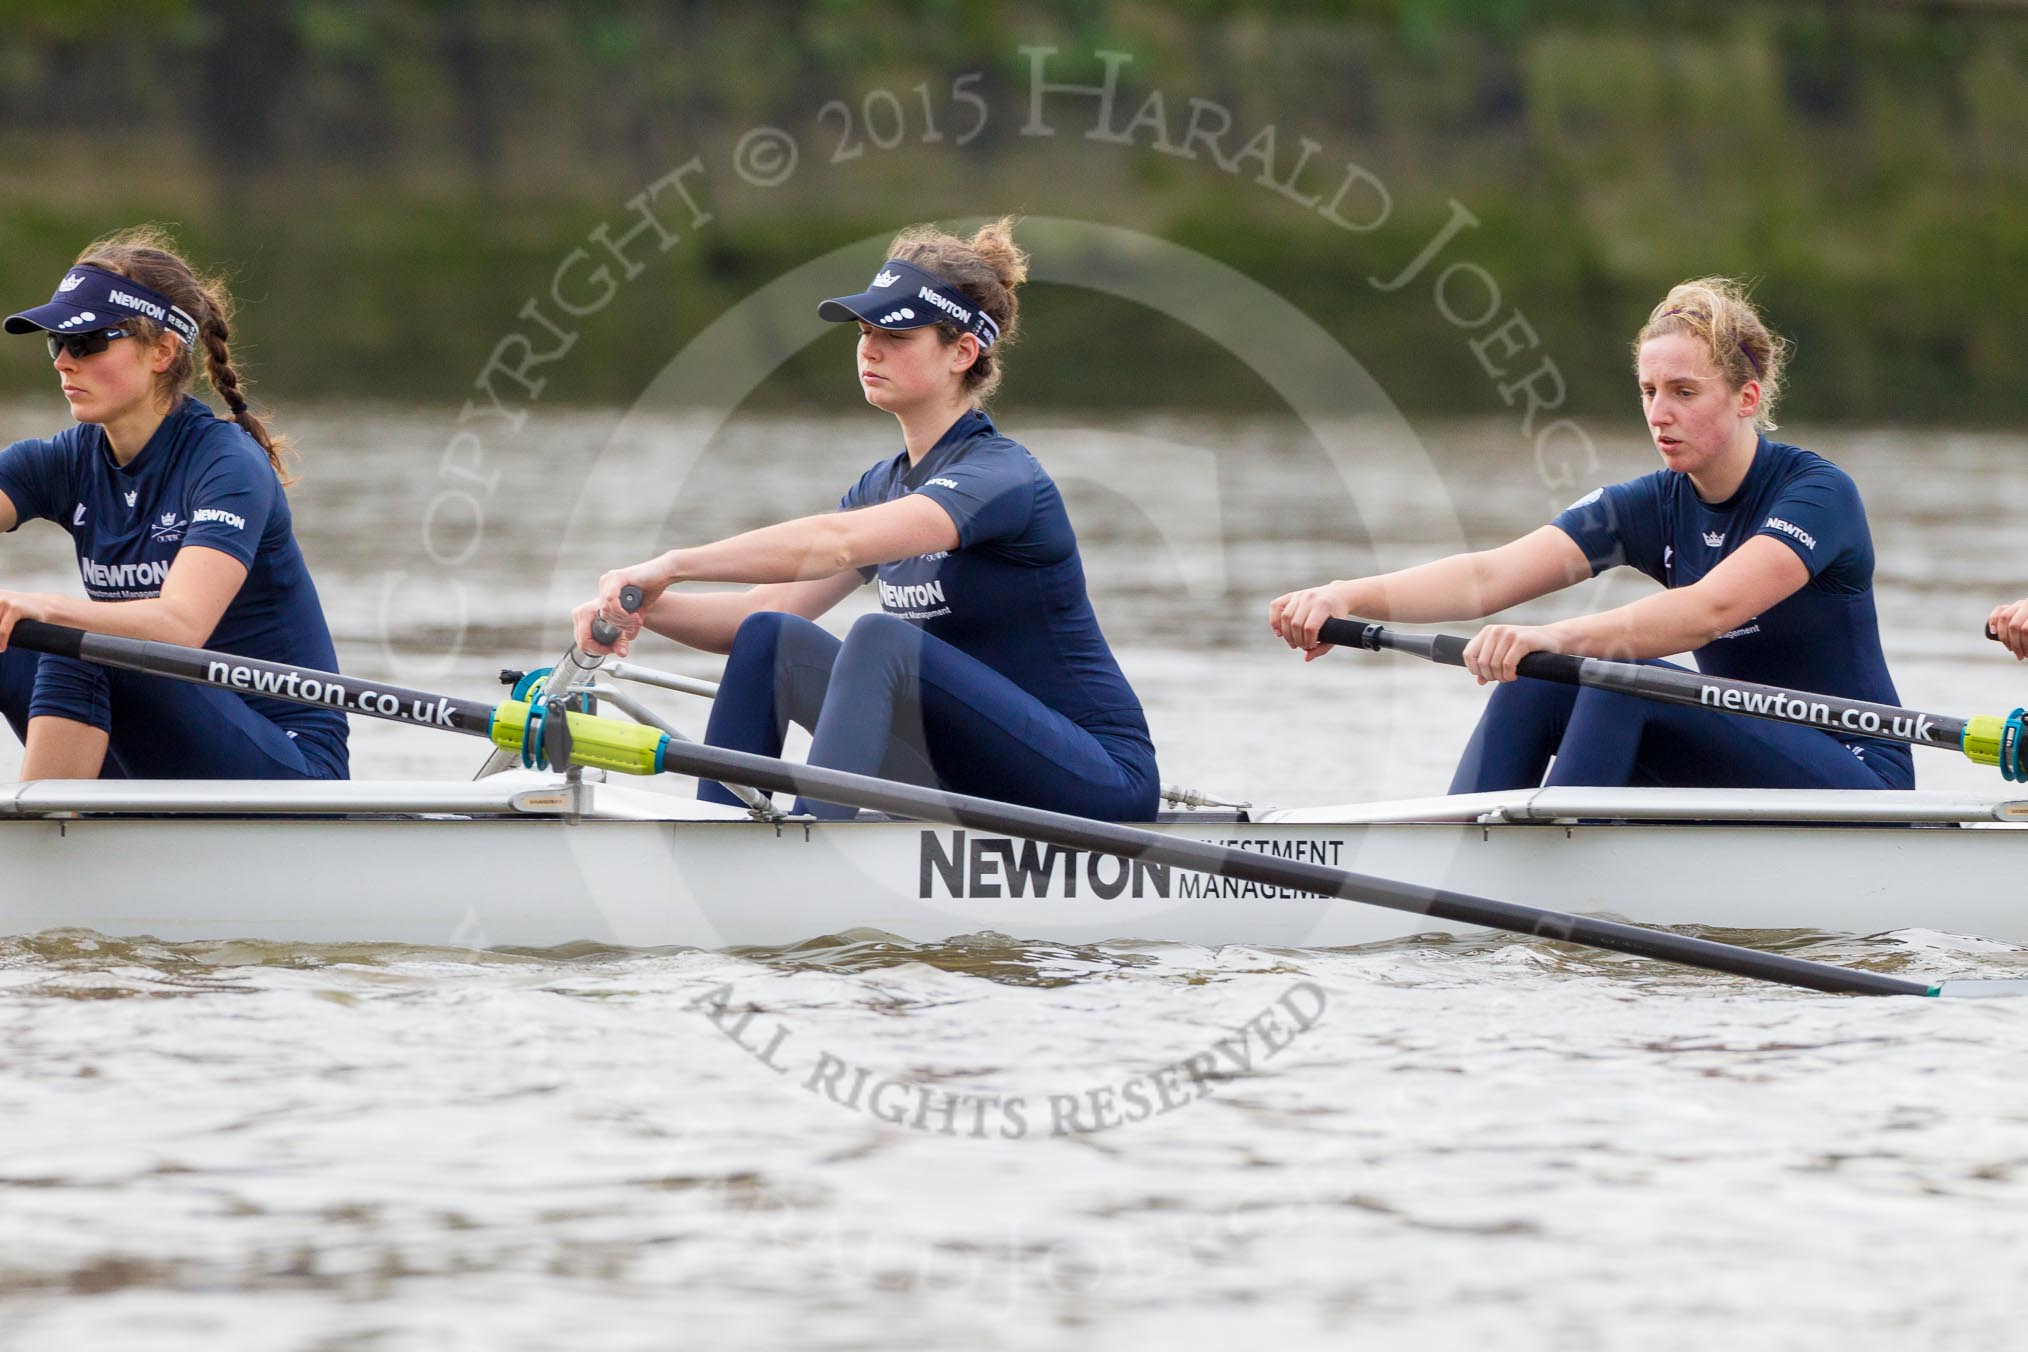 The Boat Race season 2016 - Women's Boat Race Trial Eights (OUWBC, Oxford): "Scylla" ready for the start of the race, here 7-Lauren Kedar, 6-Joanne Jansen, 5-Anastasia Chitty.
River Thames between Putney Bridge and Mortlake,
London SW15,

United Kingdom,
on 10 December 2015 at 12:18, image #131